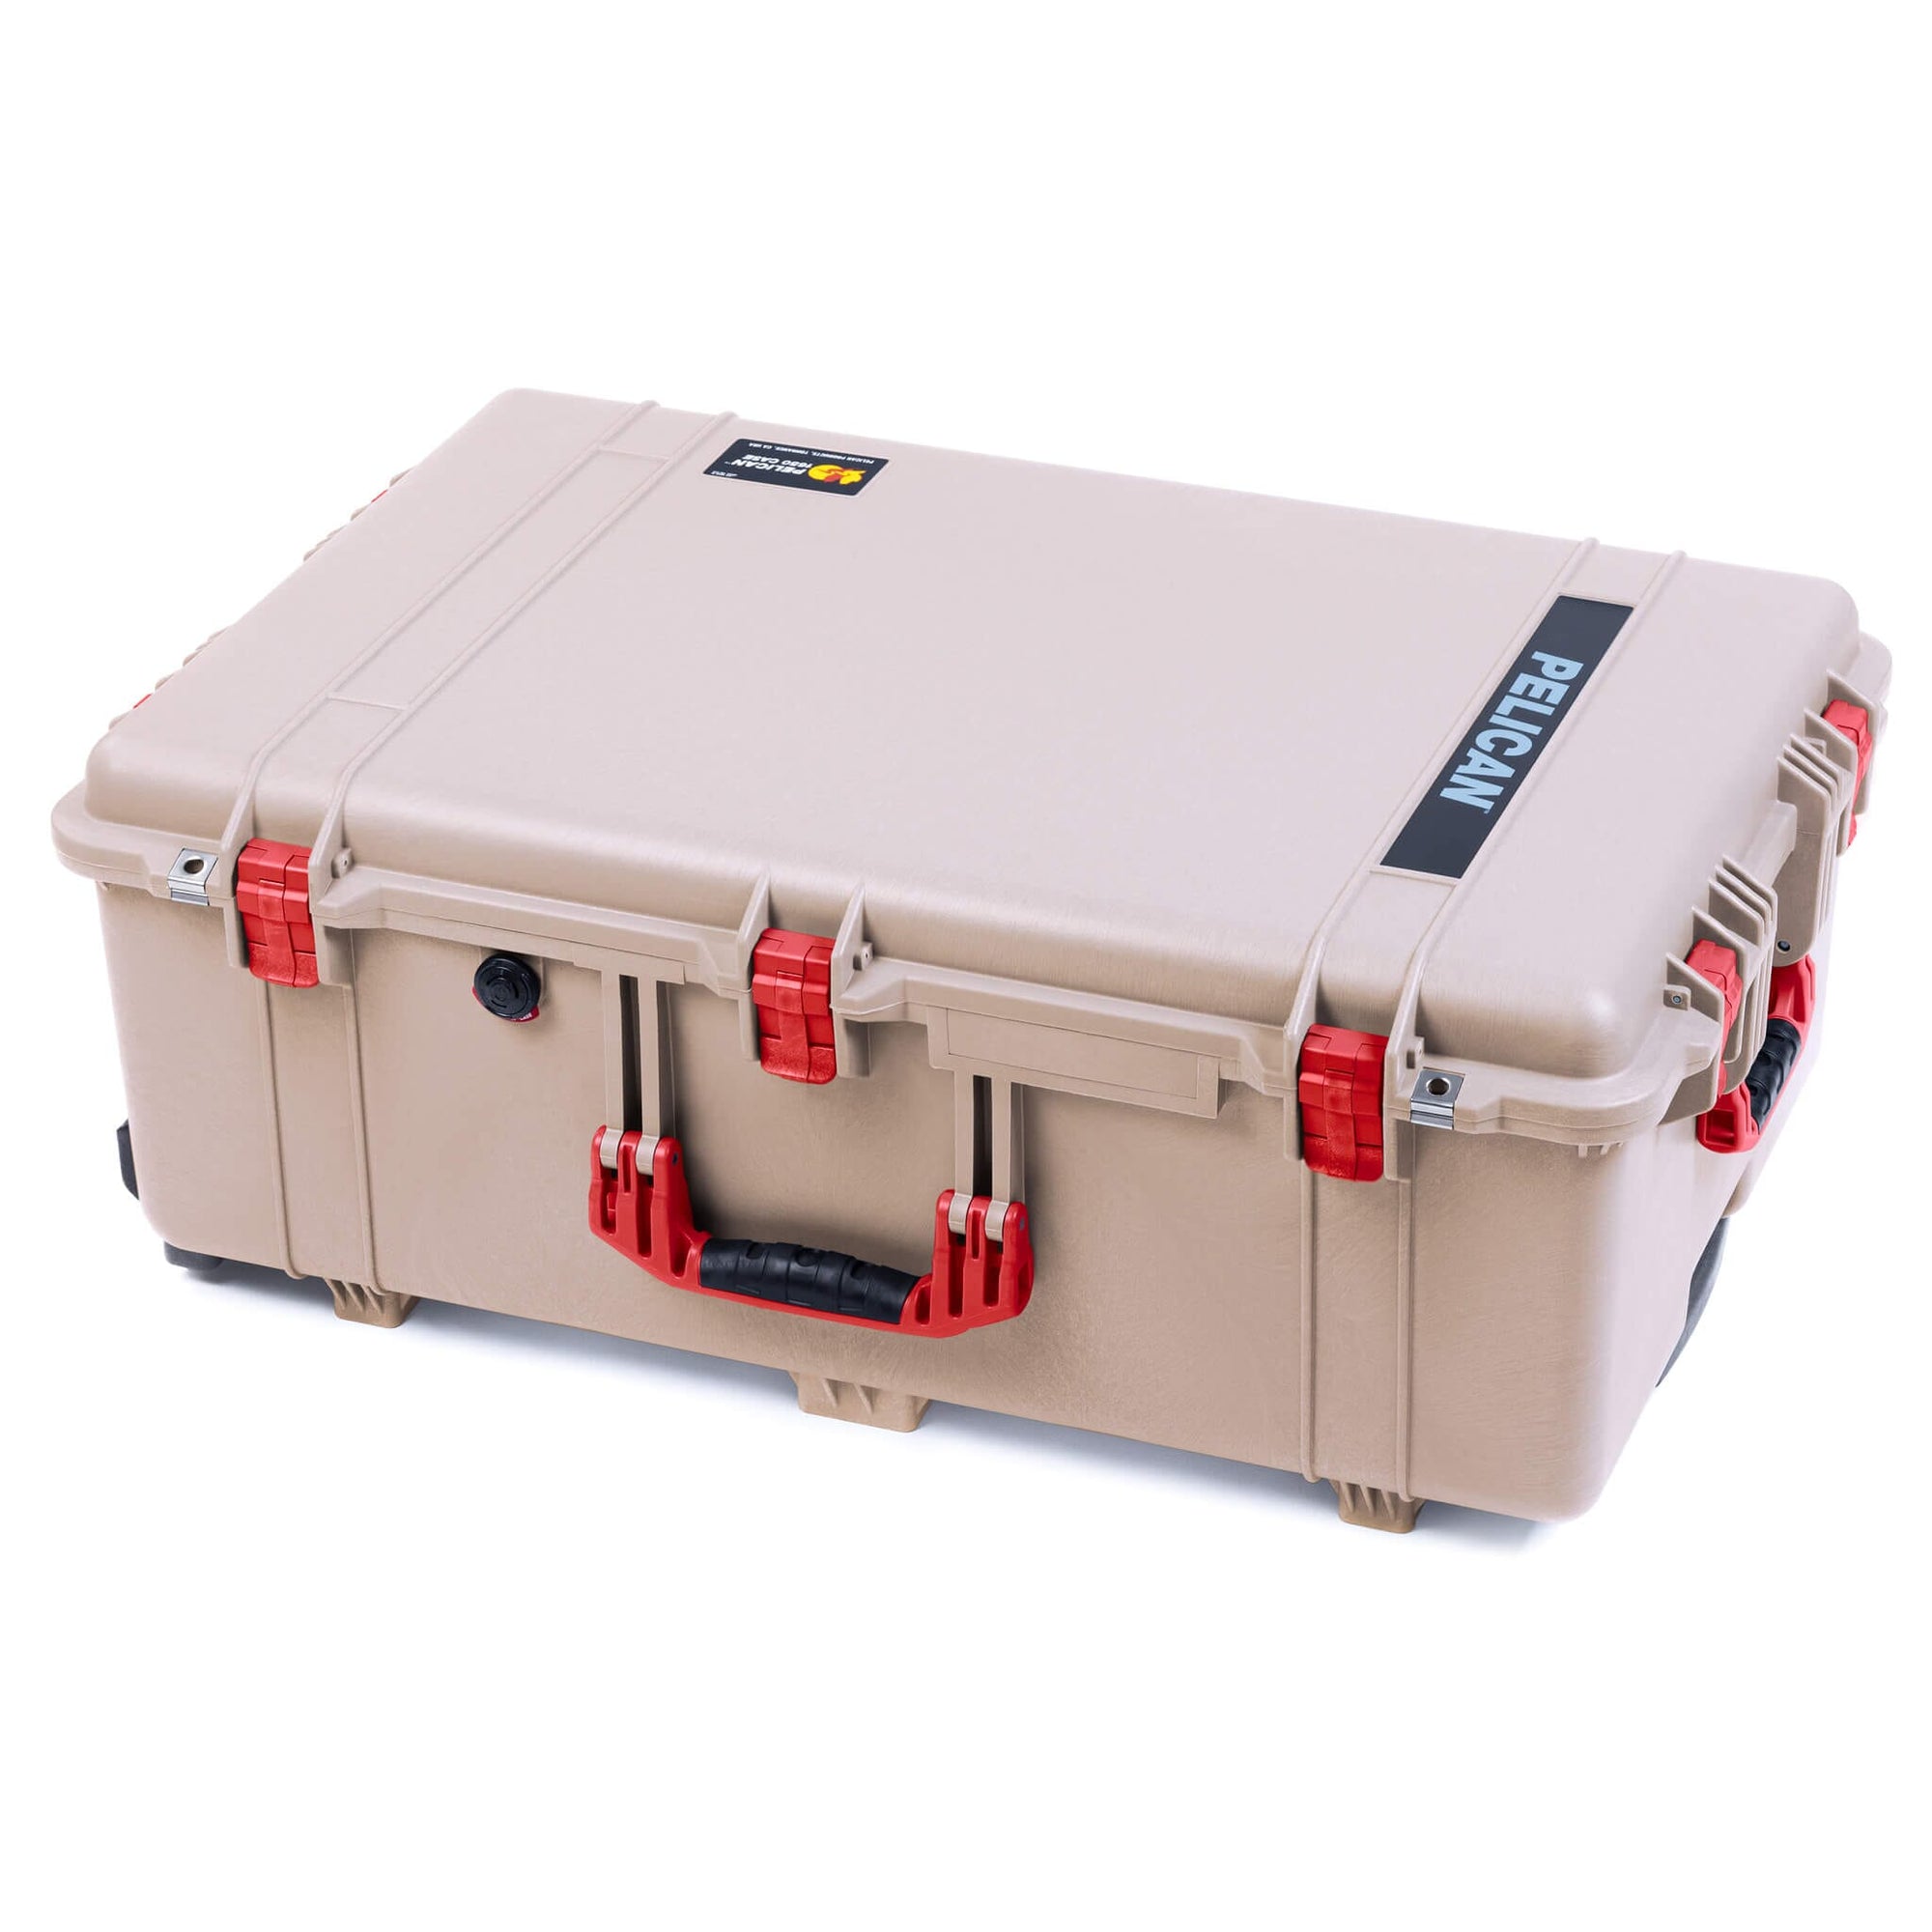 Pelican 1650 Case, Desert Tan with Red Handles & Latches ColorCase 